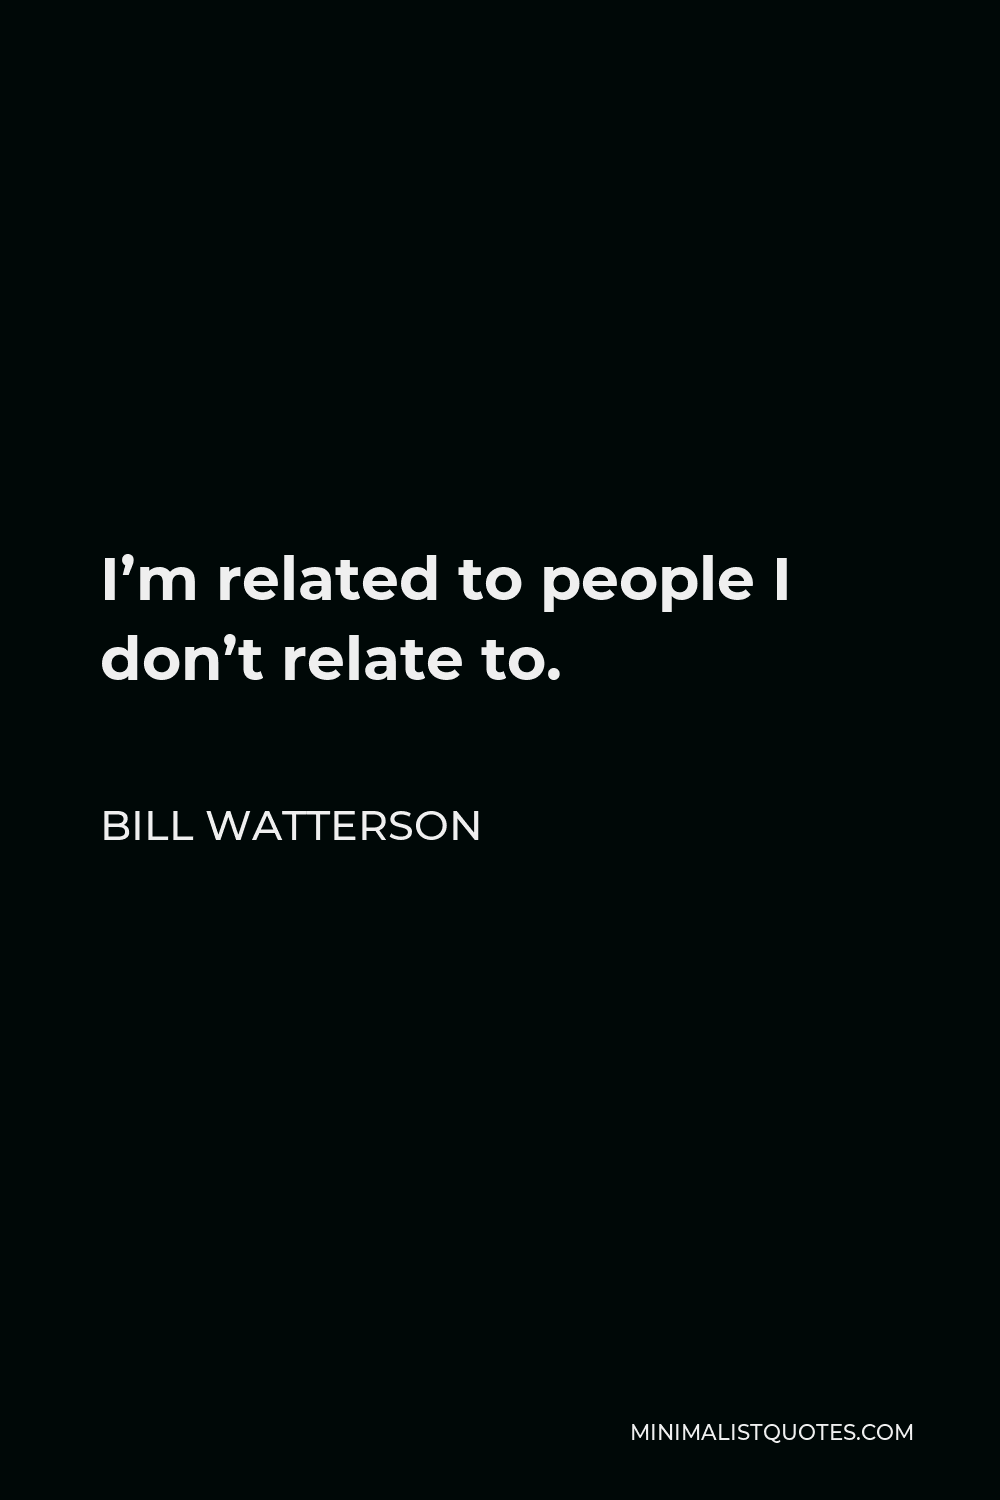 Bill Watterson Quote - I’m related to people I don’t relate to.